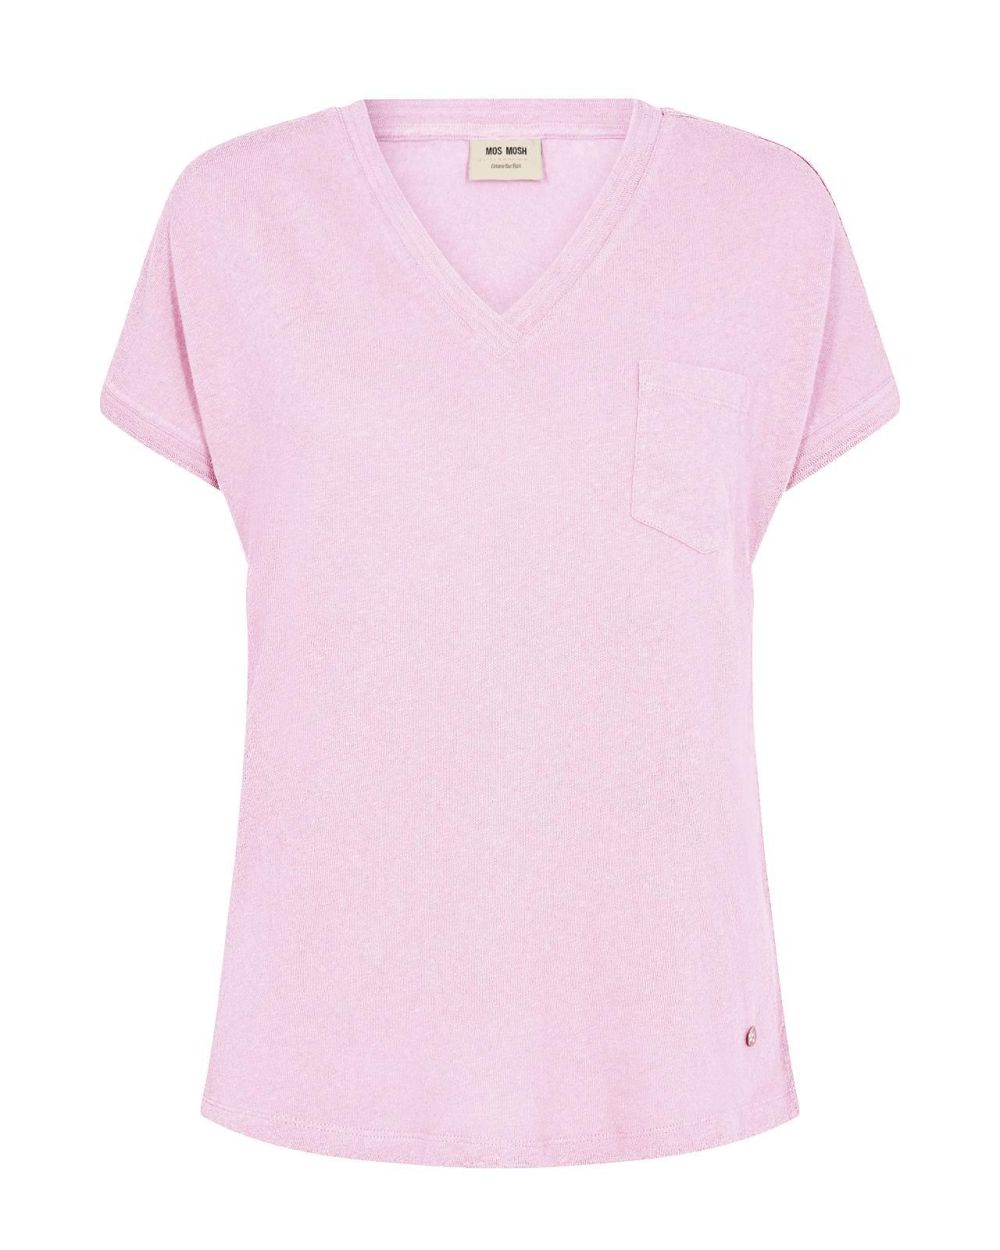 Mos Mosh T-shirt roze  (153770/741) - Corylie (Roeselare)